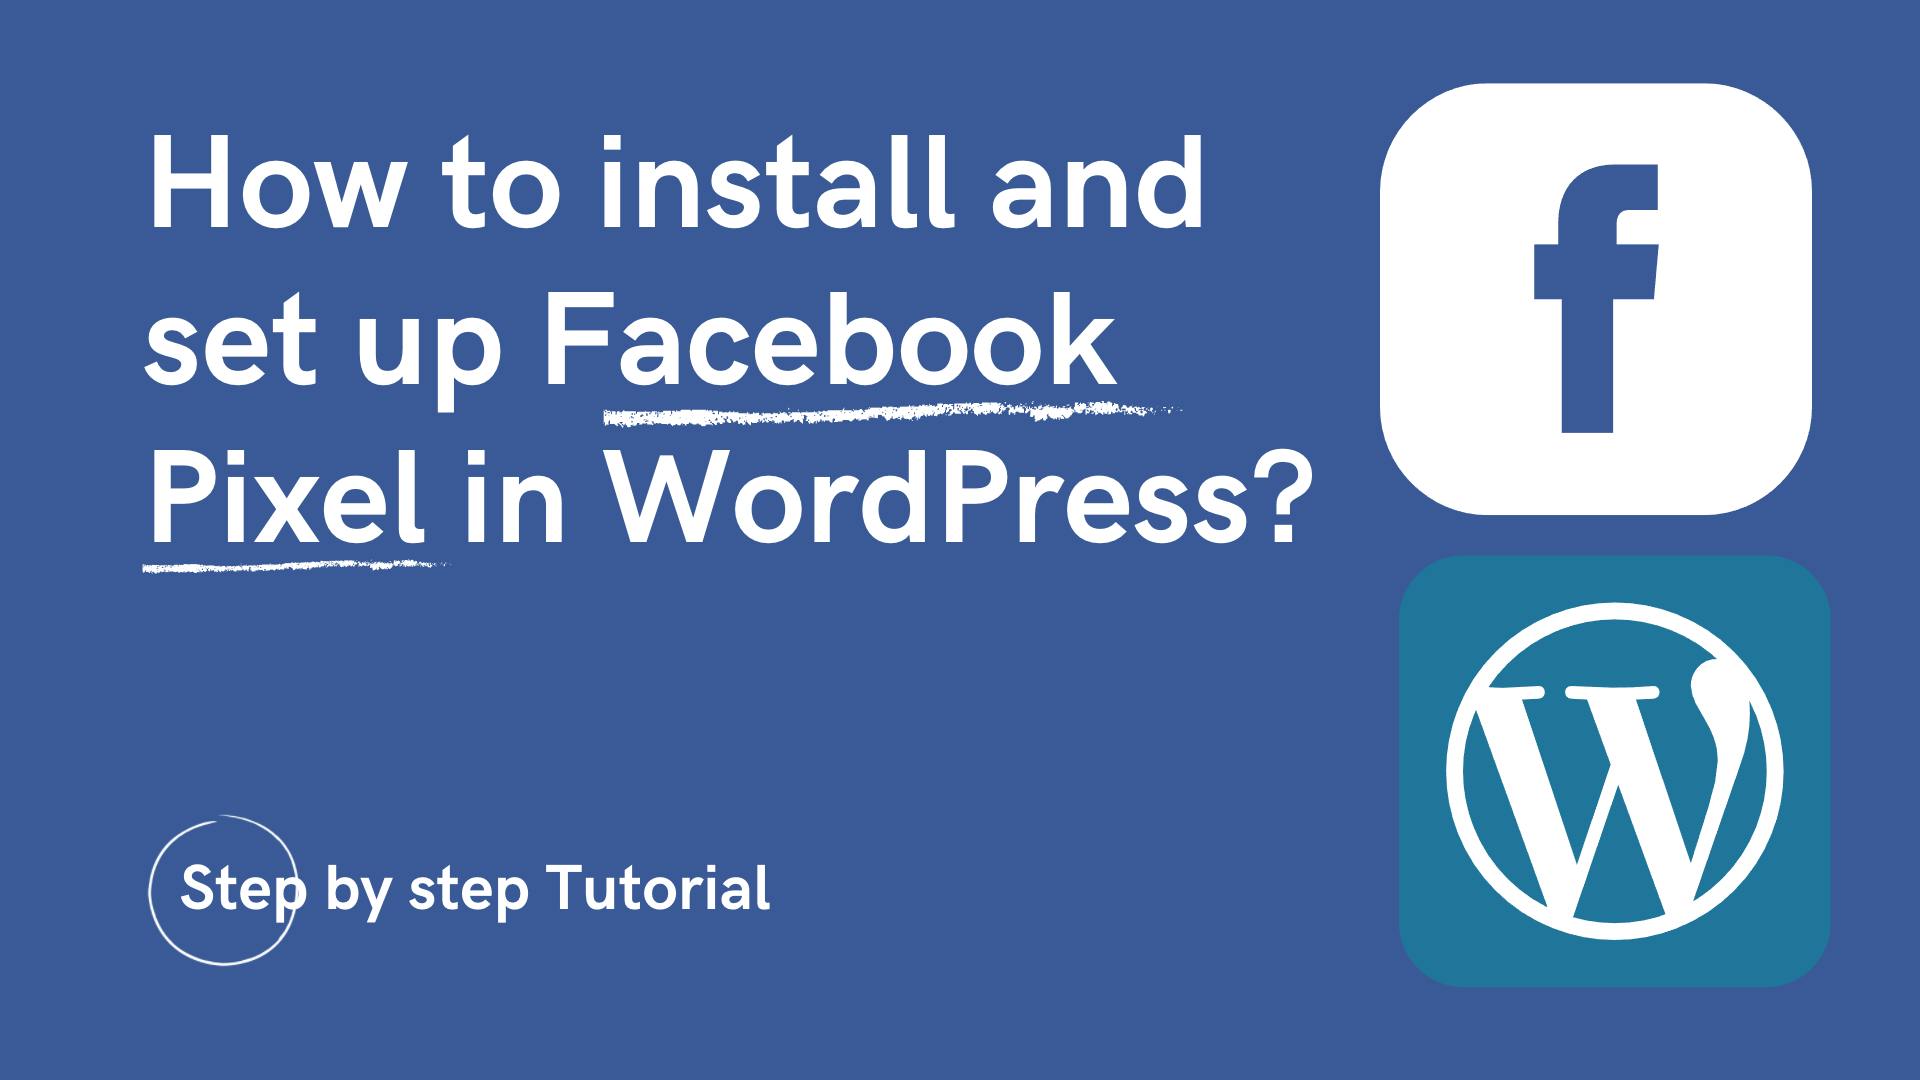 How to install and set up Facebook pixel in WordPress?